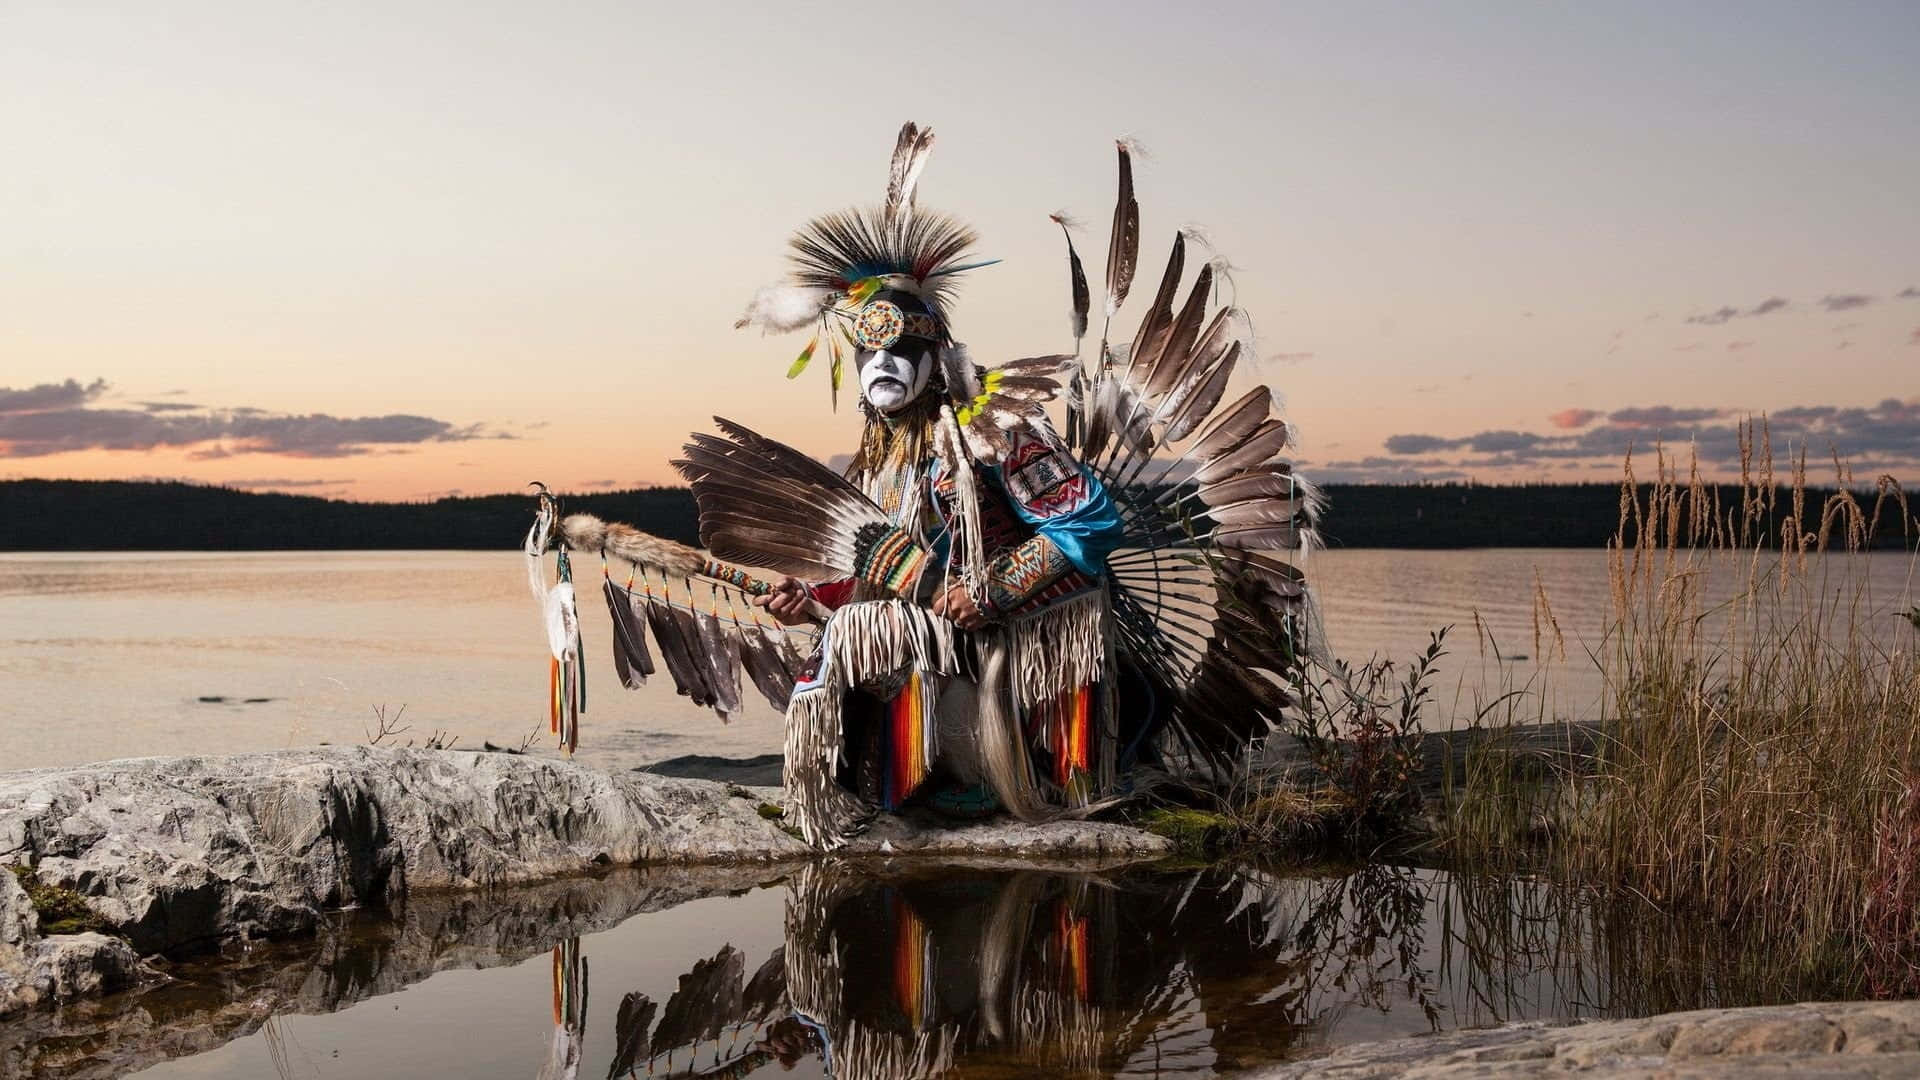 Caption: Majestic Native Warrior by the Lake Wallpaper